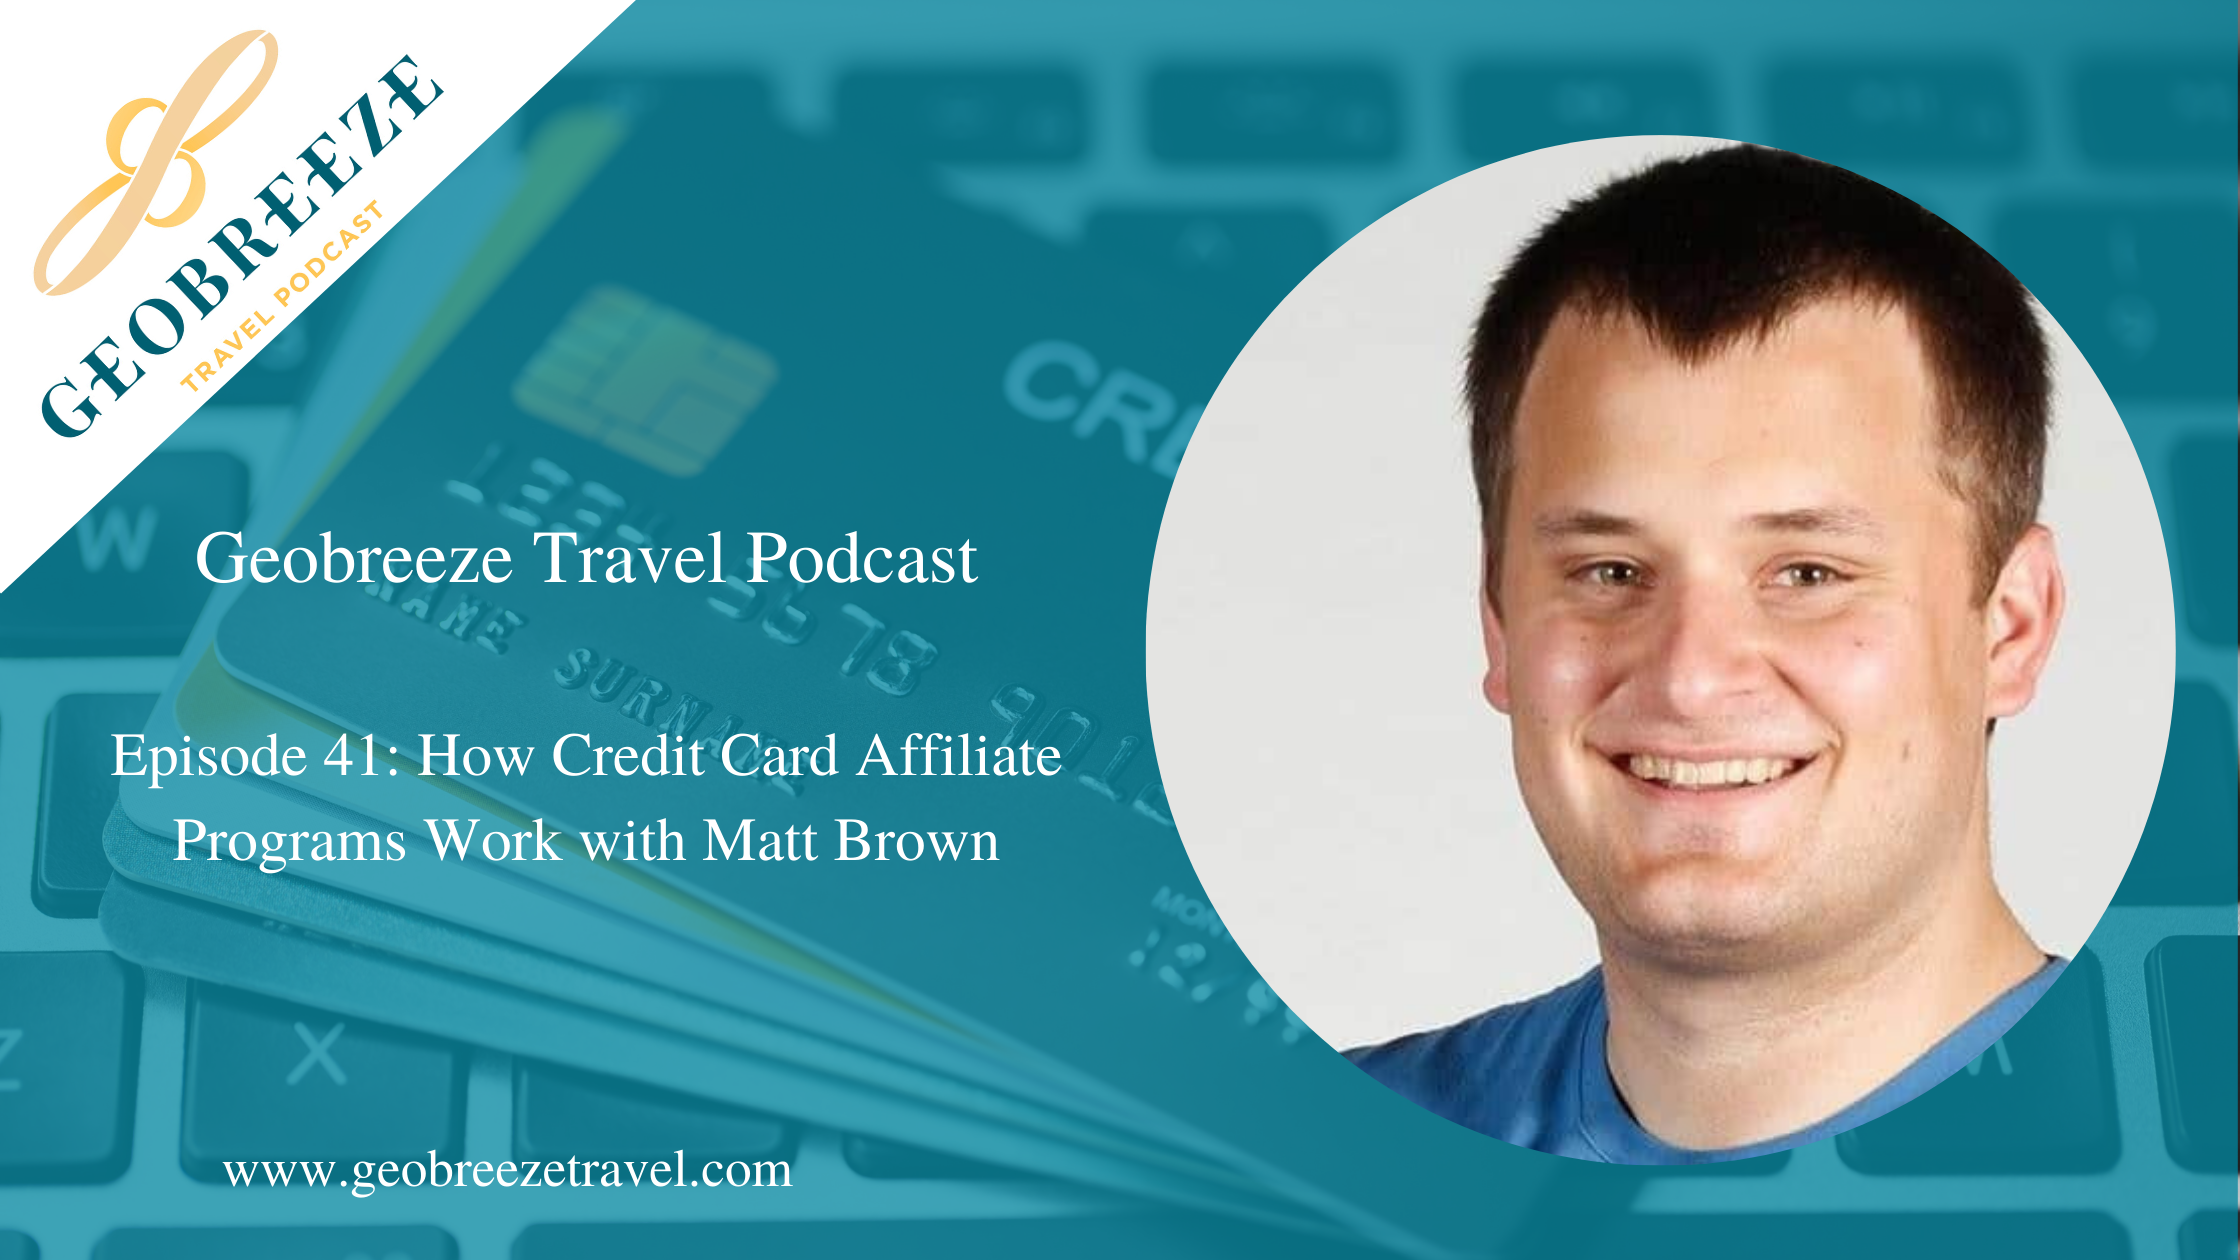 Episode 41: How Do Credit Card Affiliate Programs Work with Matt Brown